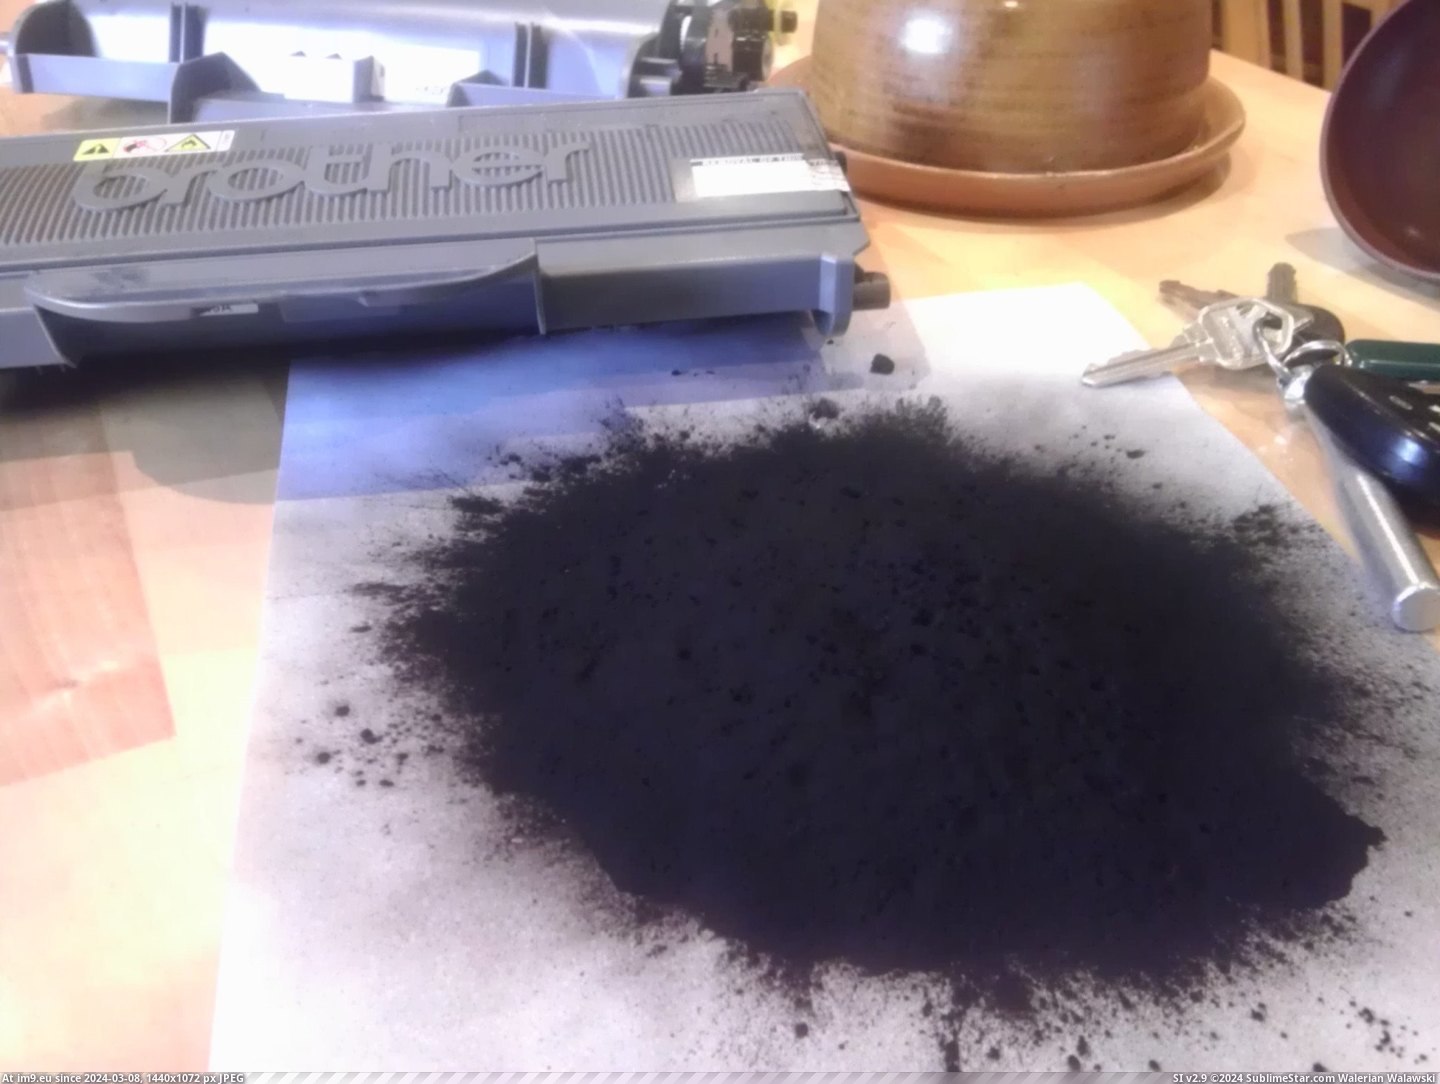 #Wtf #Old #Working #Left #Printer #Toner #Cartridge #Warning #Low #Due #Stopped [Wtf] My printer stopped working due to low toner warning. New cartridge was $80 and this is how much toner was left in the old  Pic. (Bild von album My r/WTF favs))